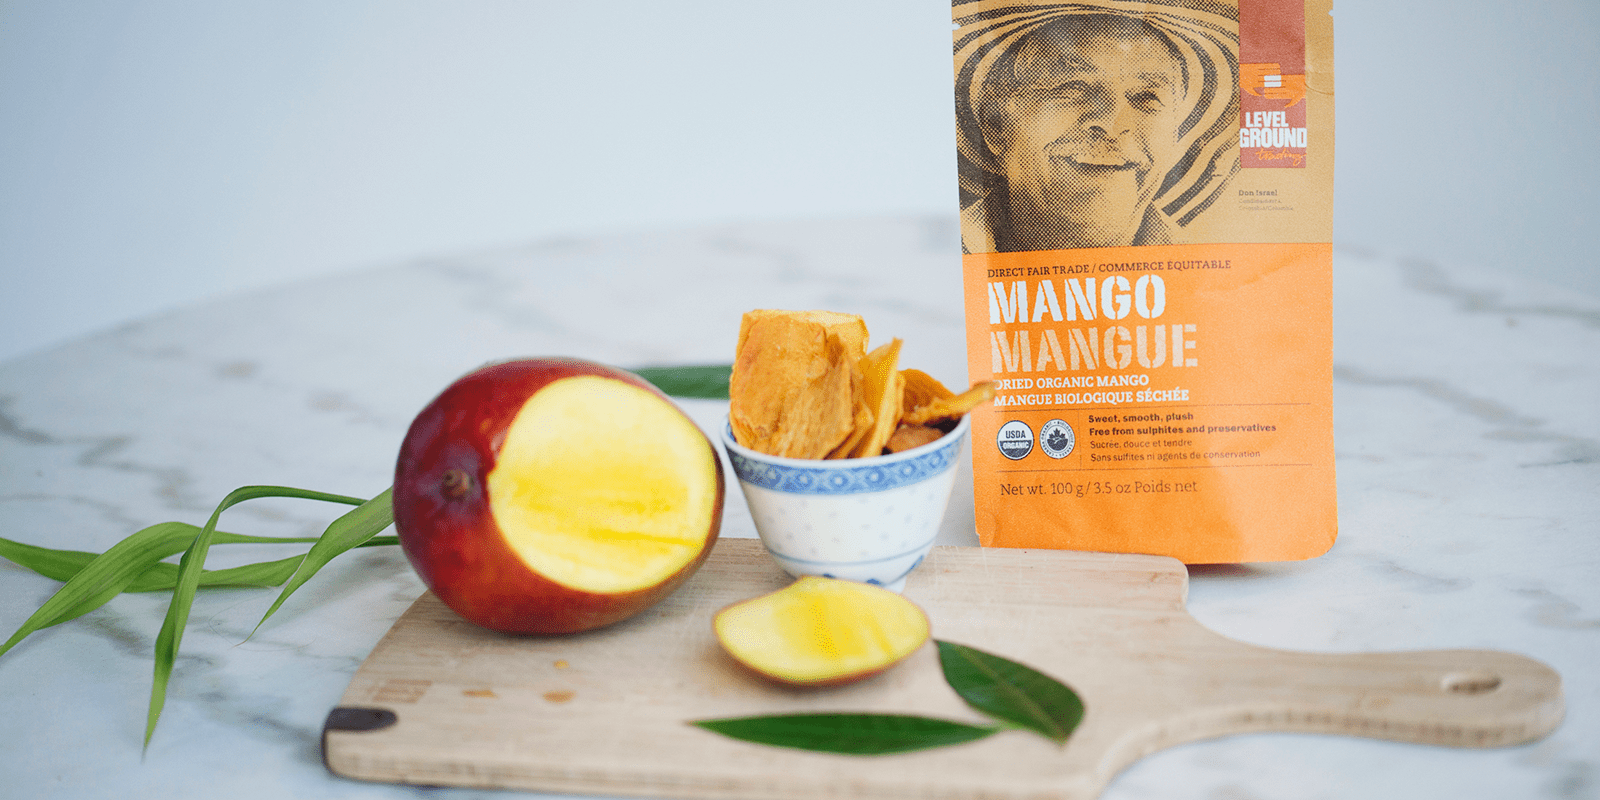 Fairtrade vegan snacks guide from Rosette Fair Trade, featuring dried mangoes, granola and more